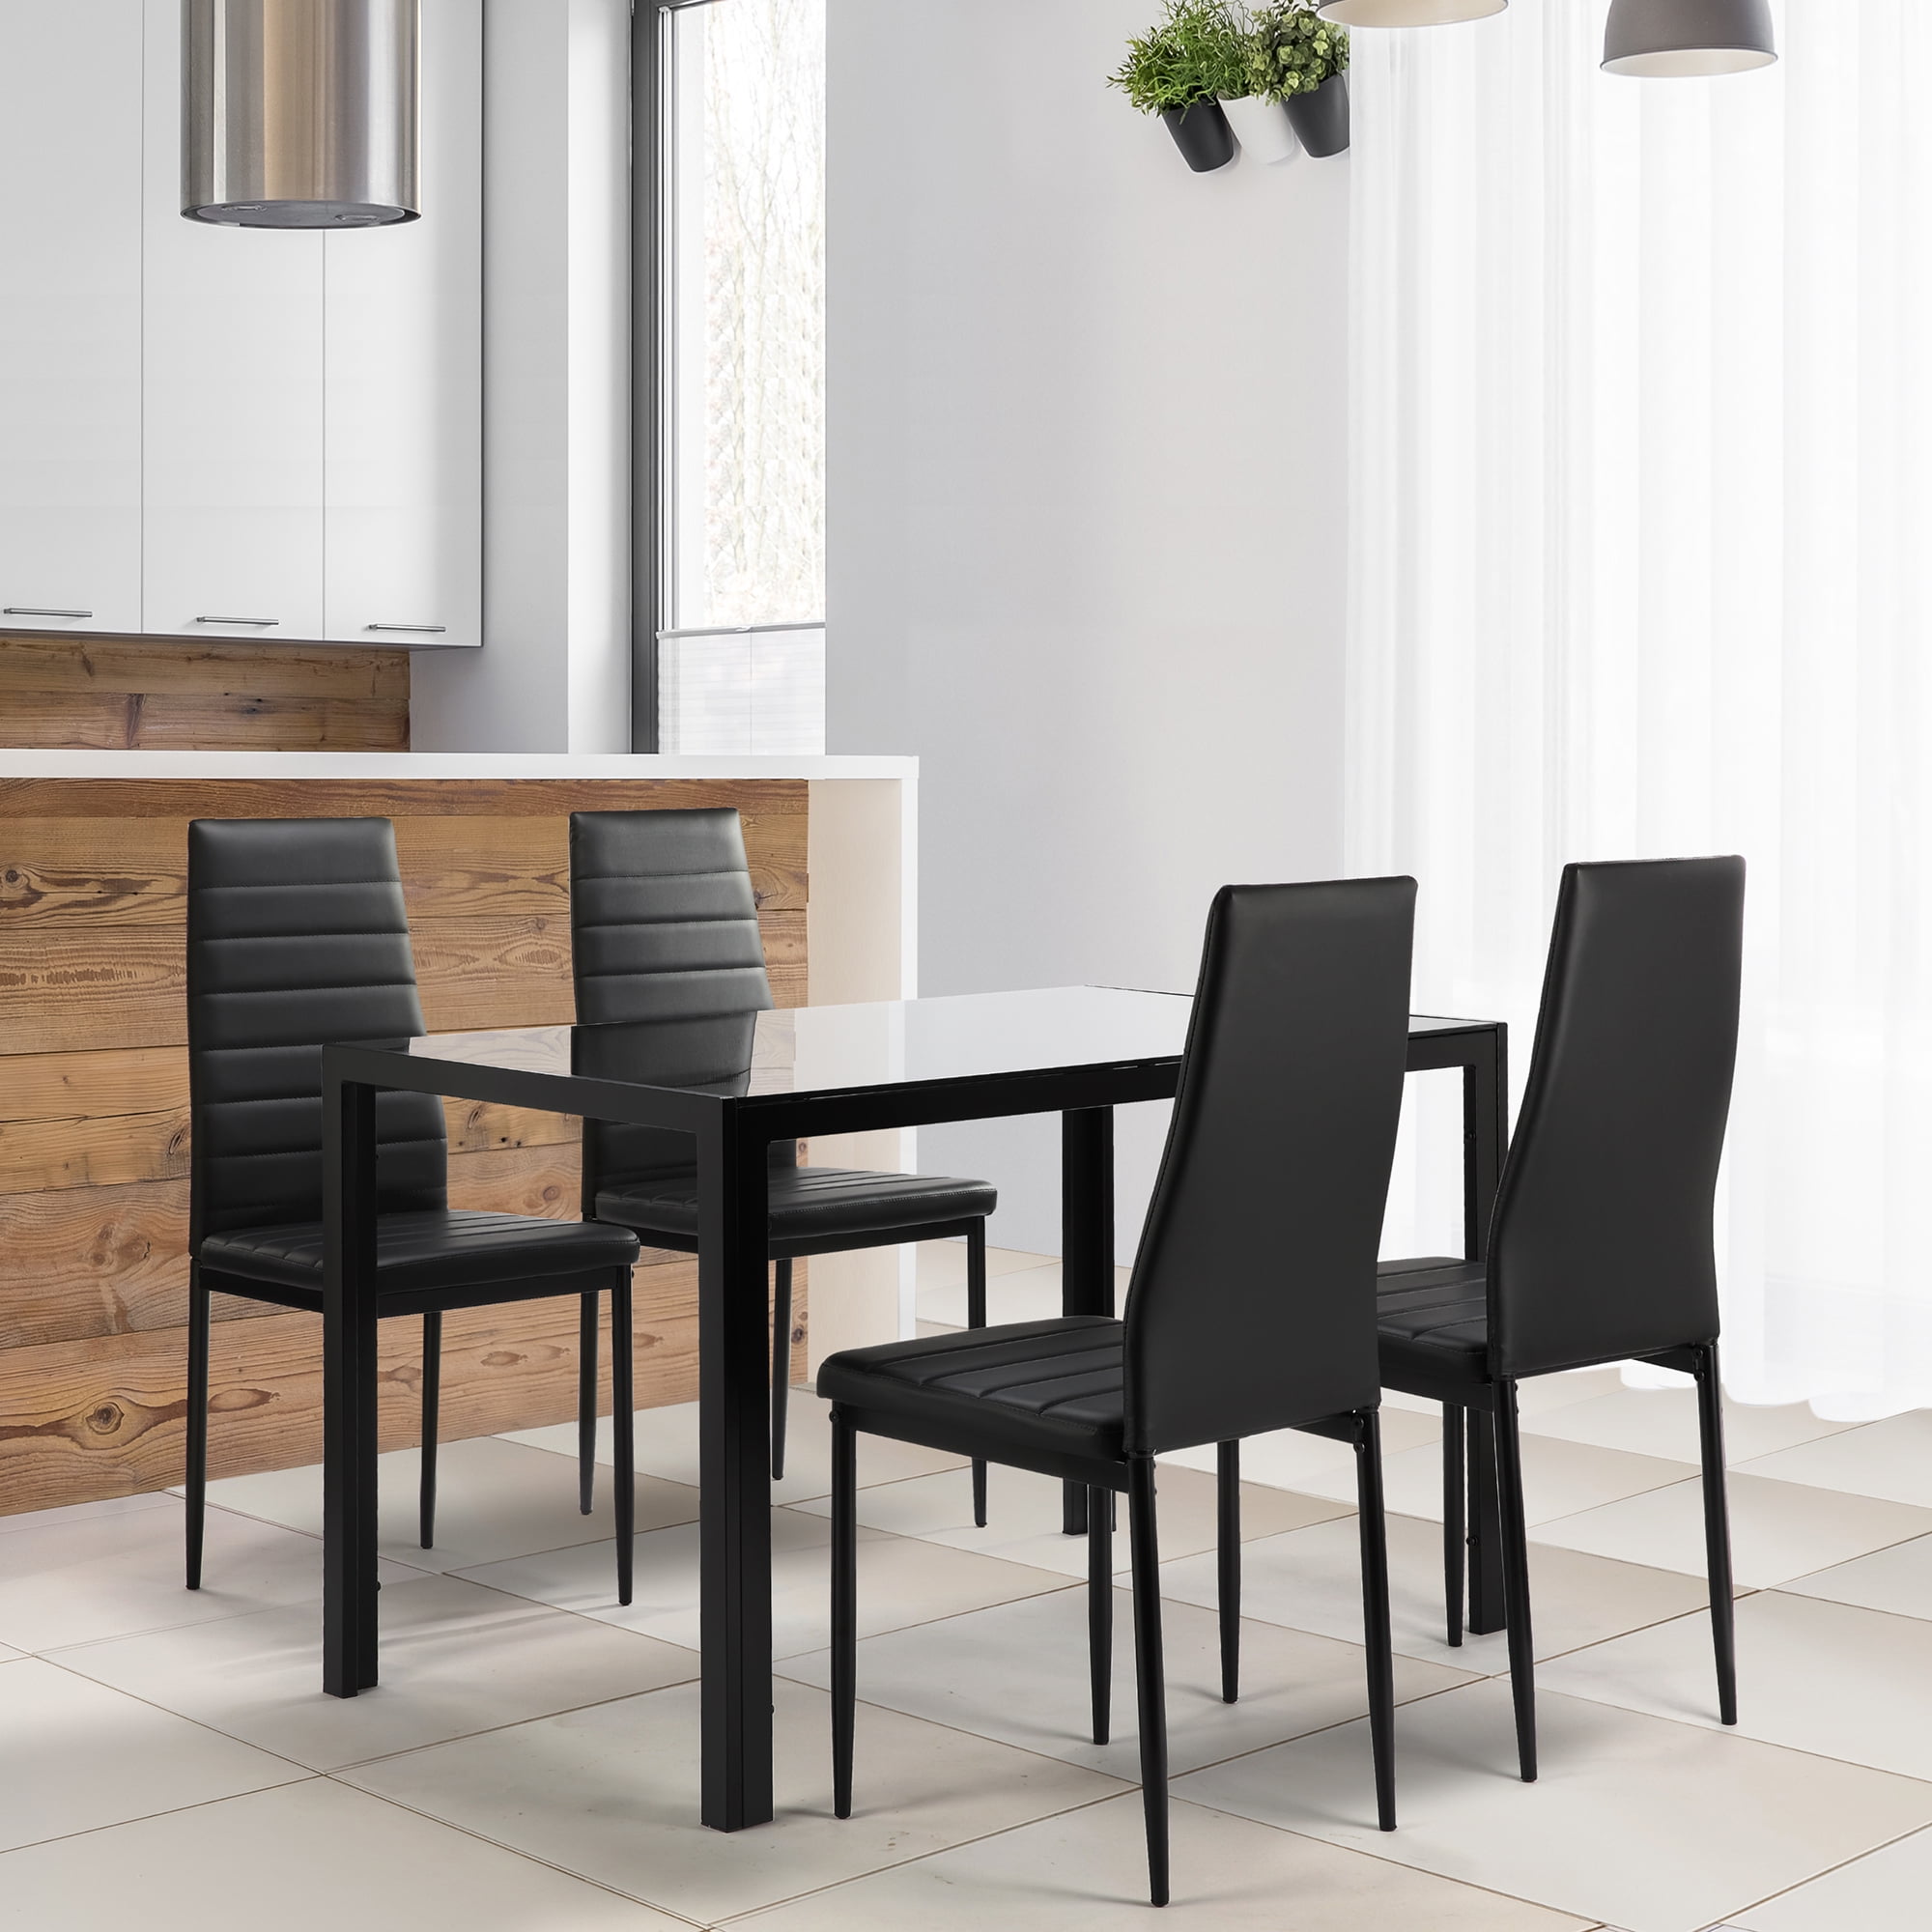 Enyopro 5 Piece Kitchen Dining Table, Leather Chairs For Small Spaces